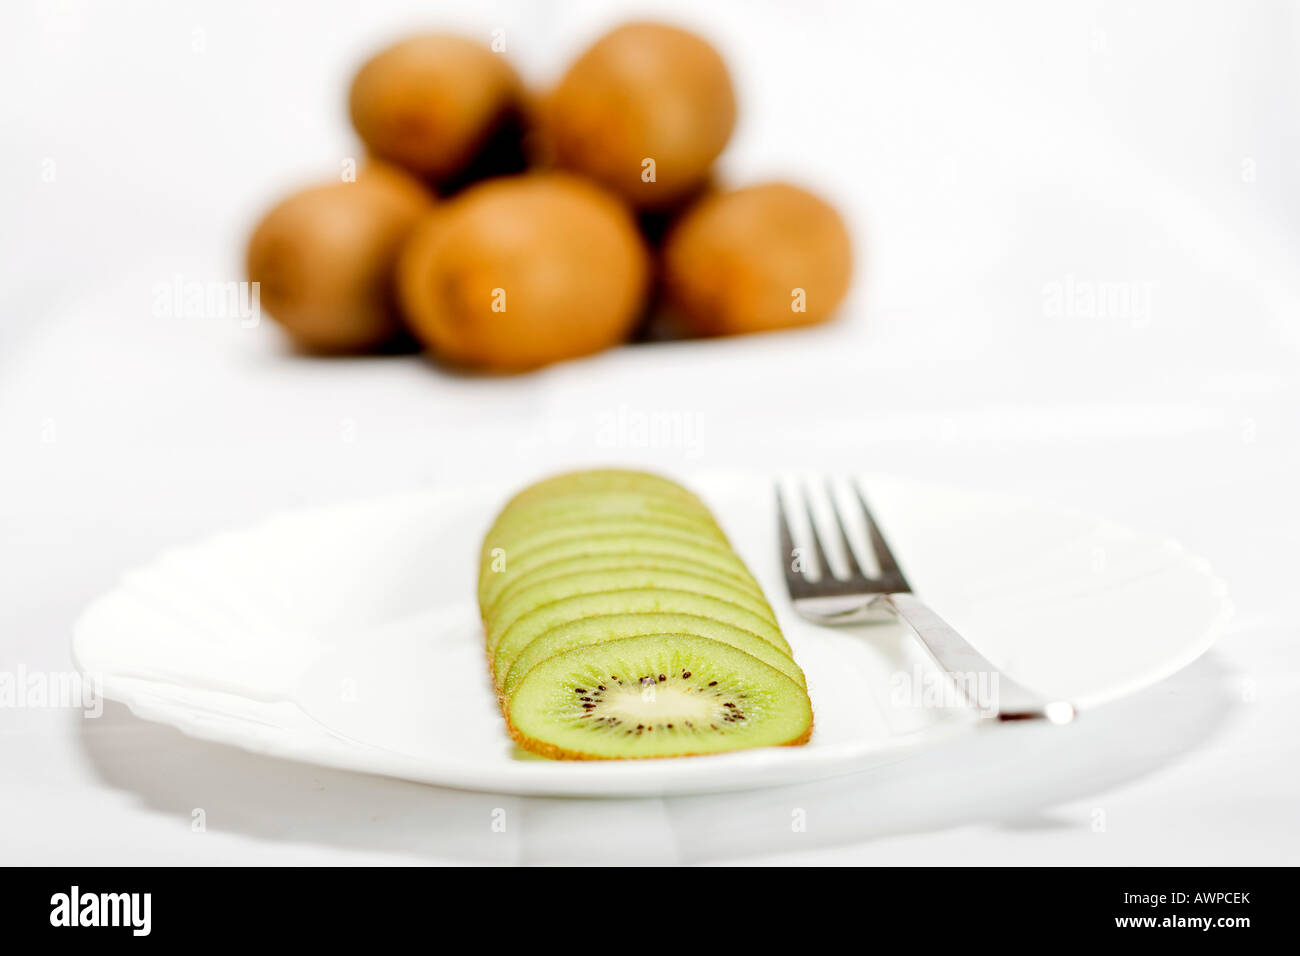 Single sliced kiwi on a plate with fork, more kiwis piled at the back Stock Photo